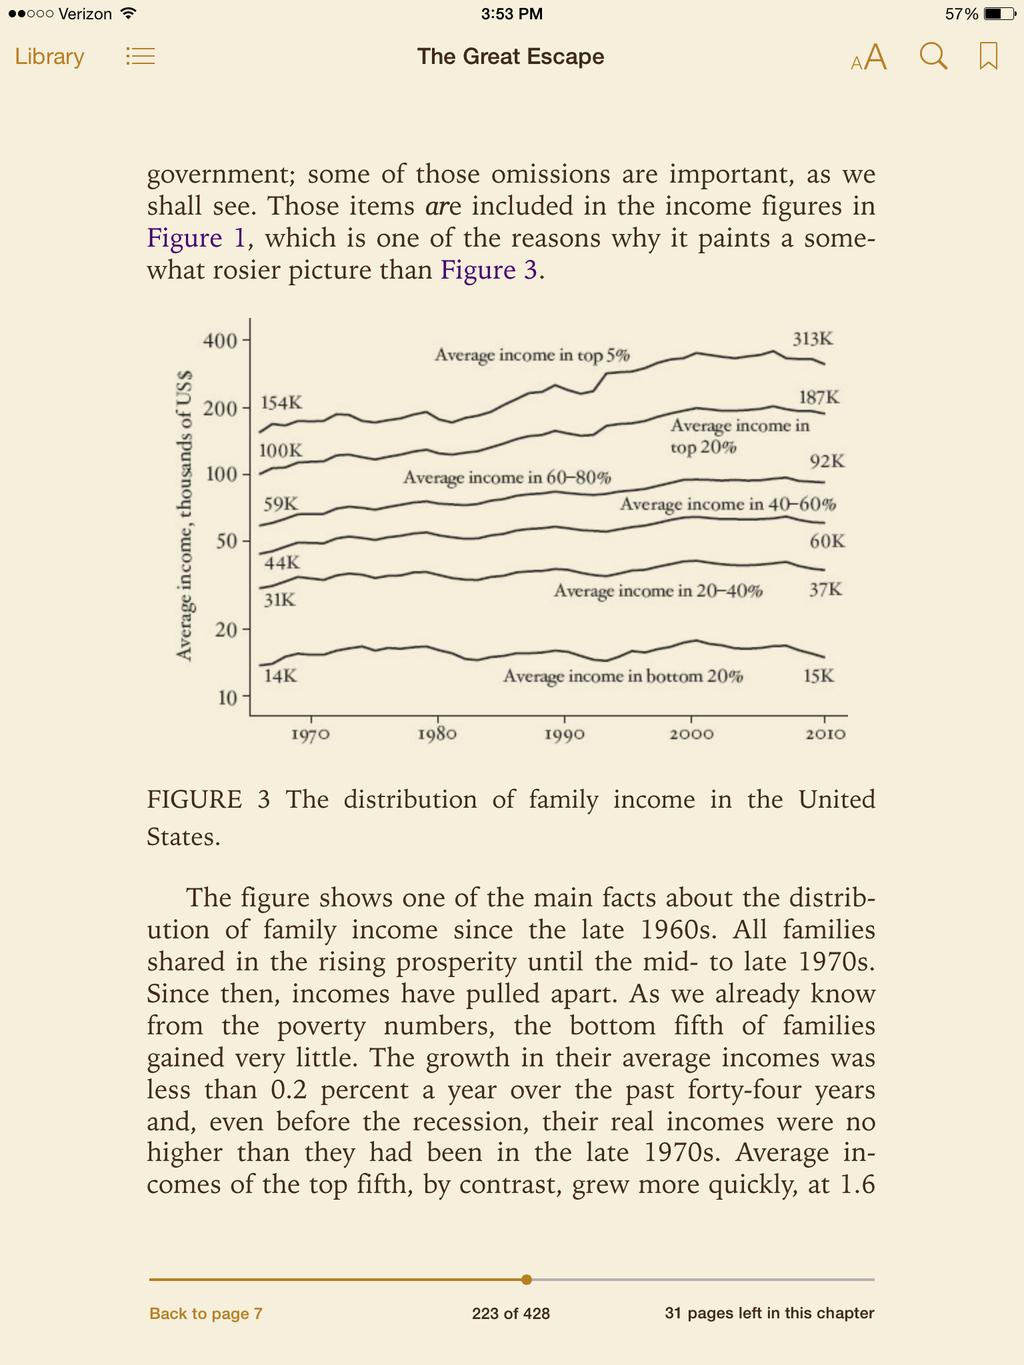 Evolution of Household Income Distribution in